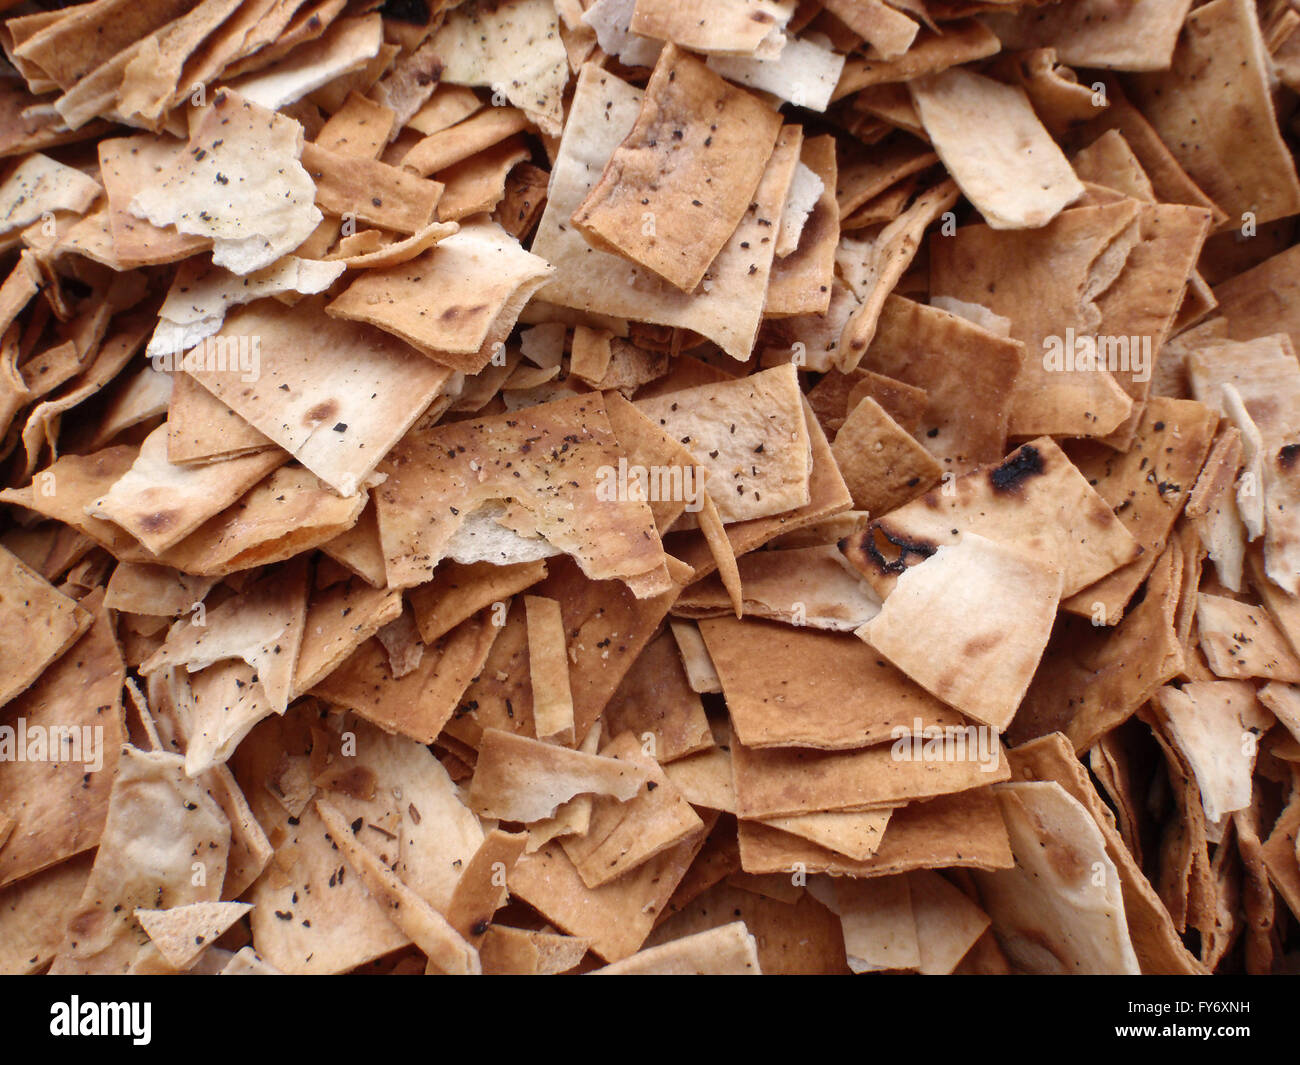 Pile of square and broken Pita Chips pattern used for dipping into jam samples Stock Photo